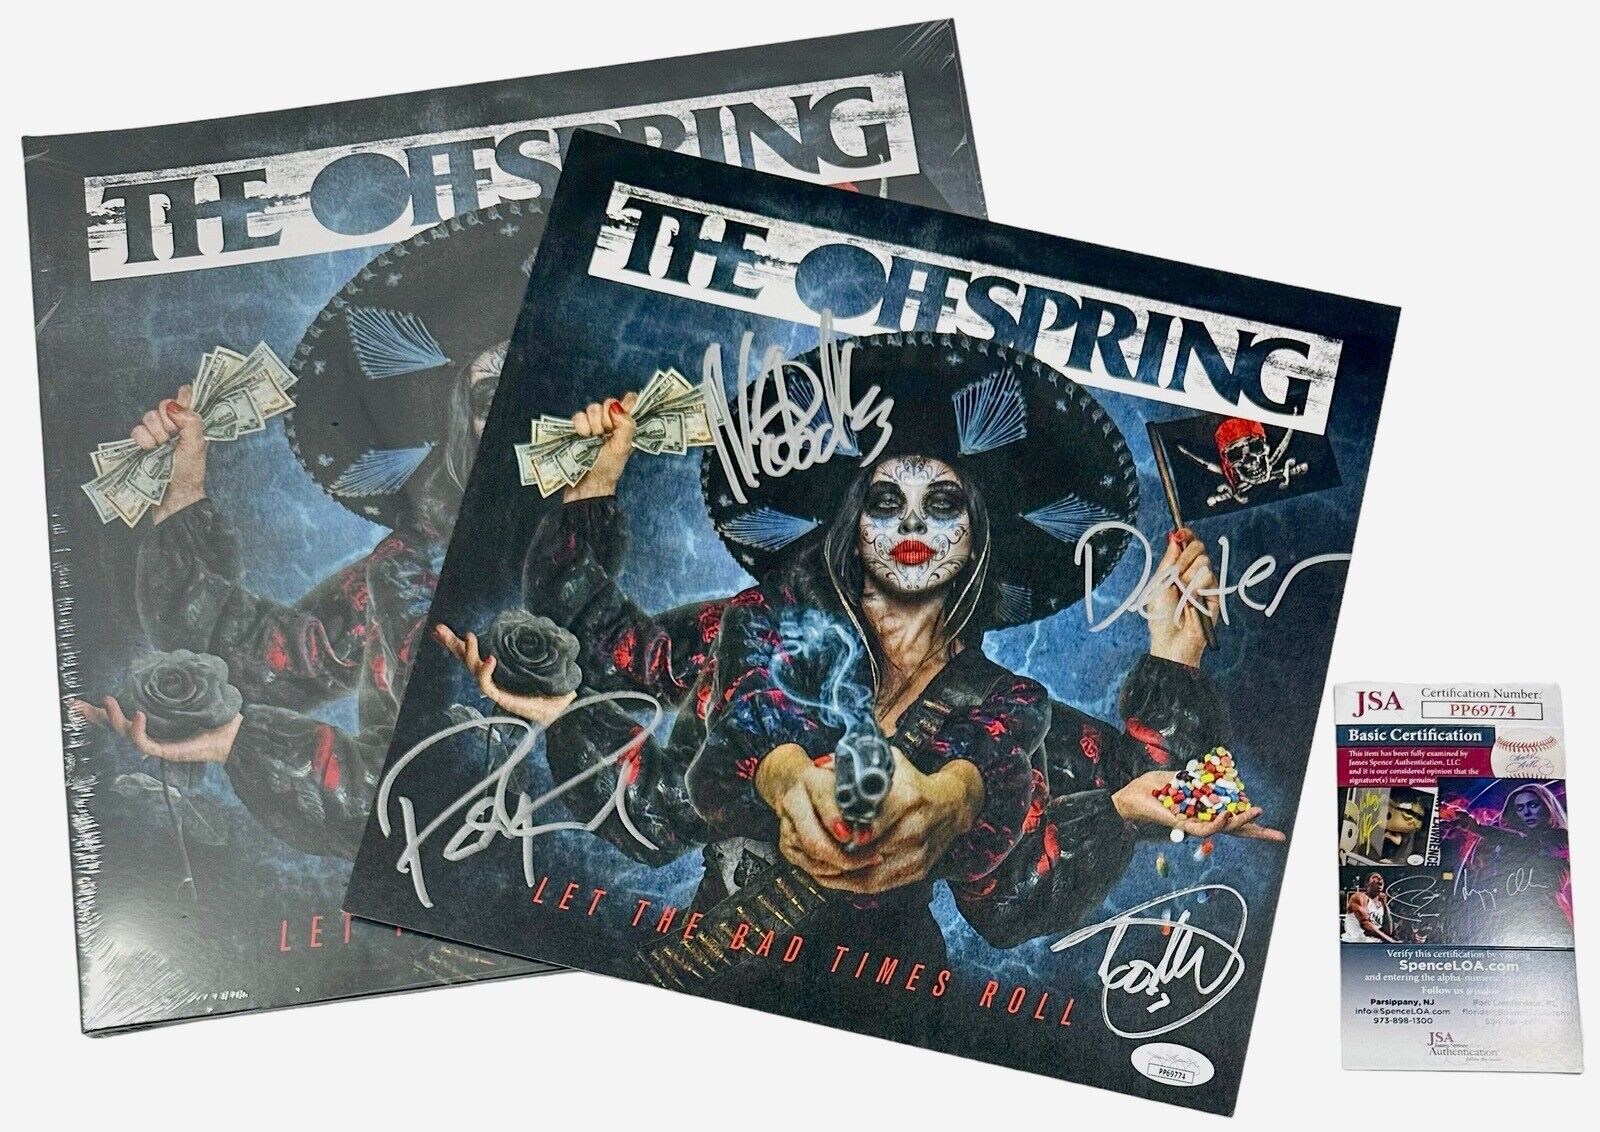 The Offspring Signed Let The Bad Times Roll Poster & LP Vinyl Record Album + JSA